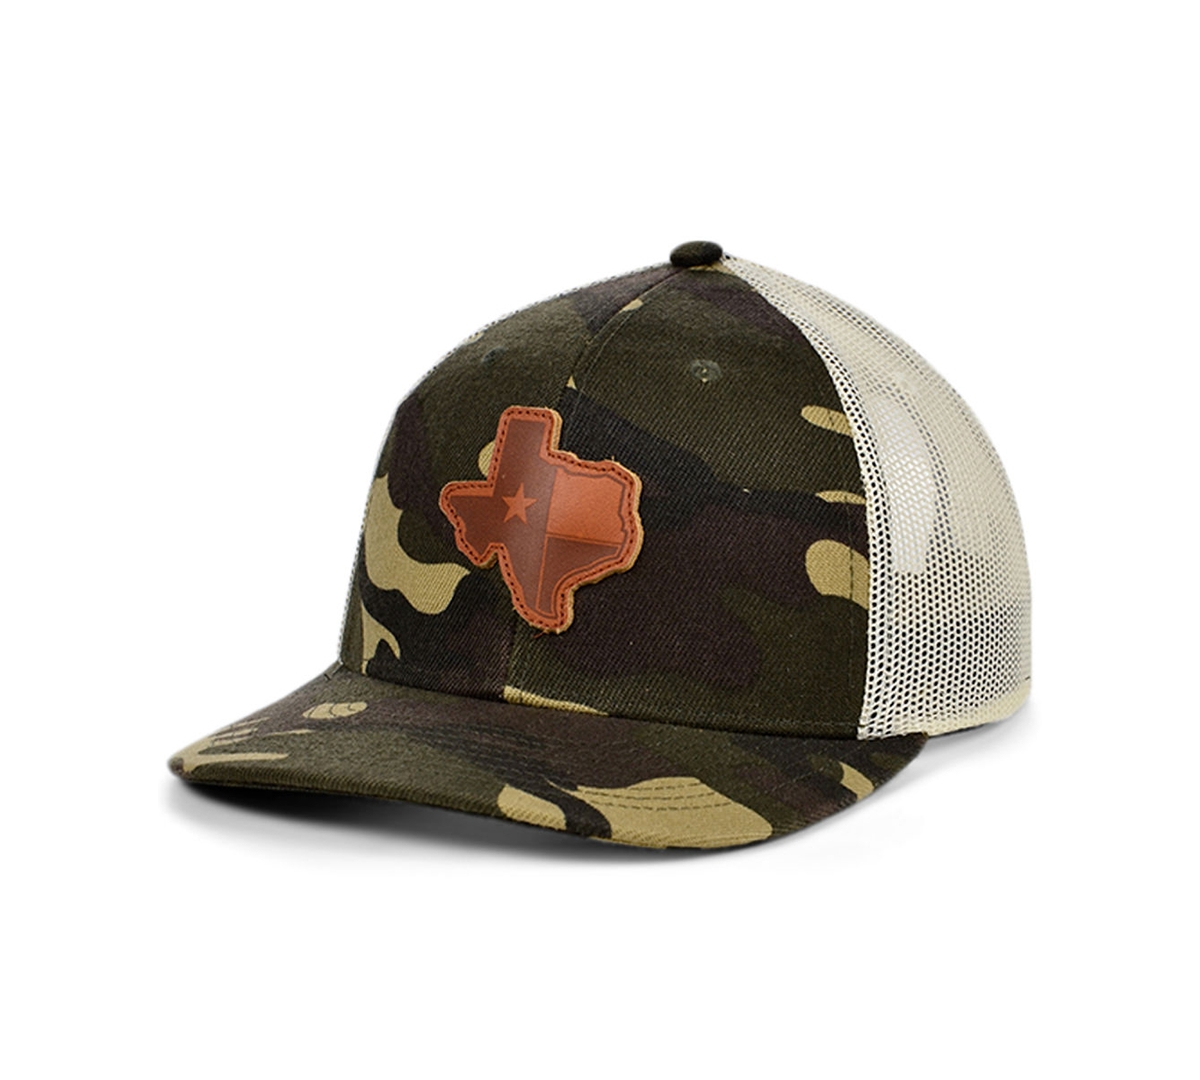 Lids Local Crowns Texas Woodland State Patch Curved Trucker Cap In Woodlandcamo,ivory,brown